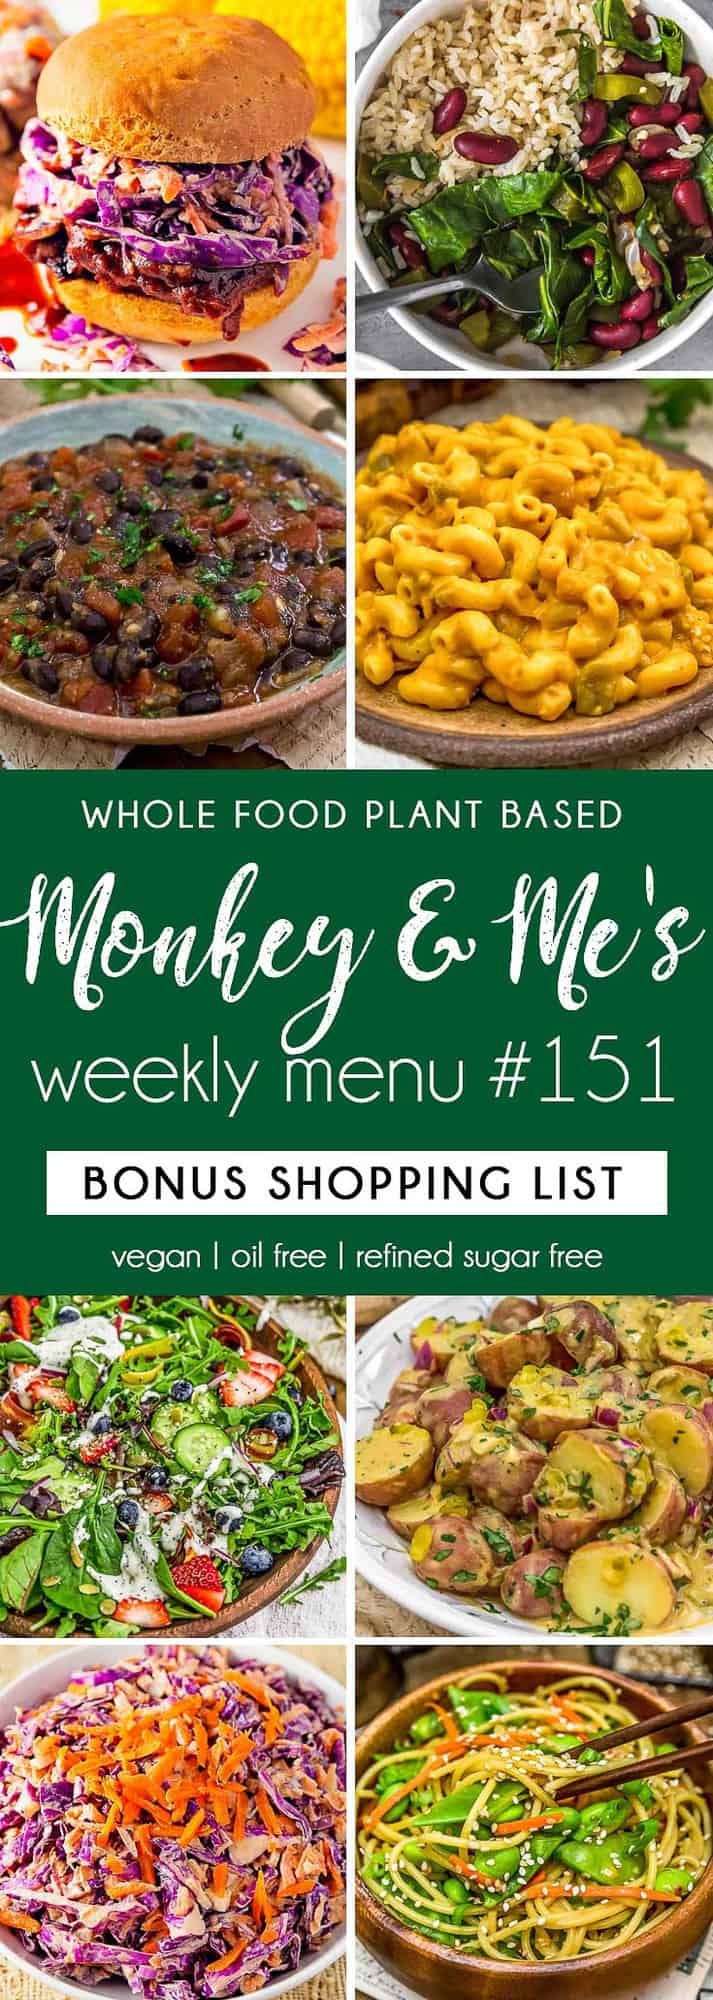 Monkey and Me's Menu 151 featuring 8 recipes